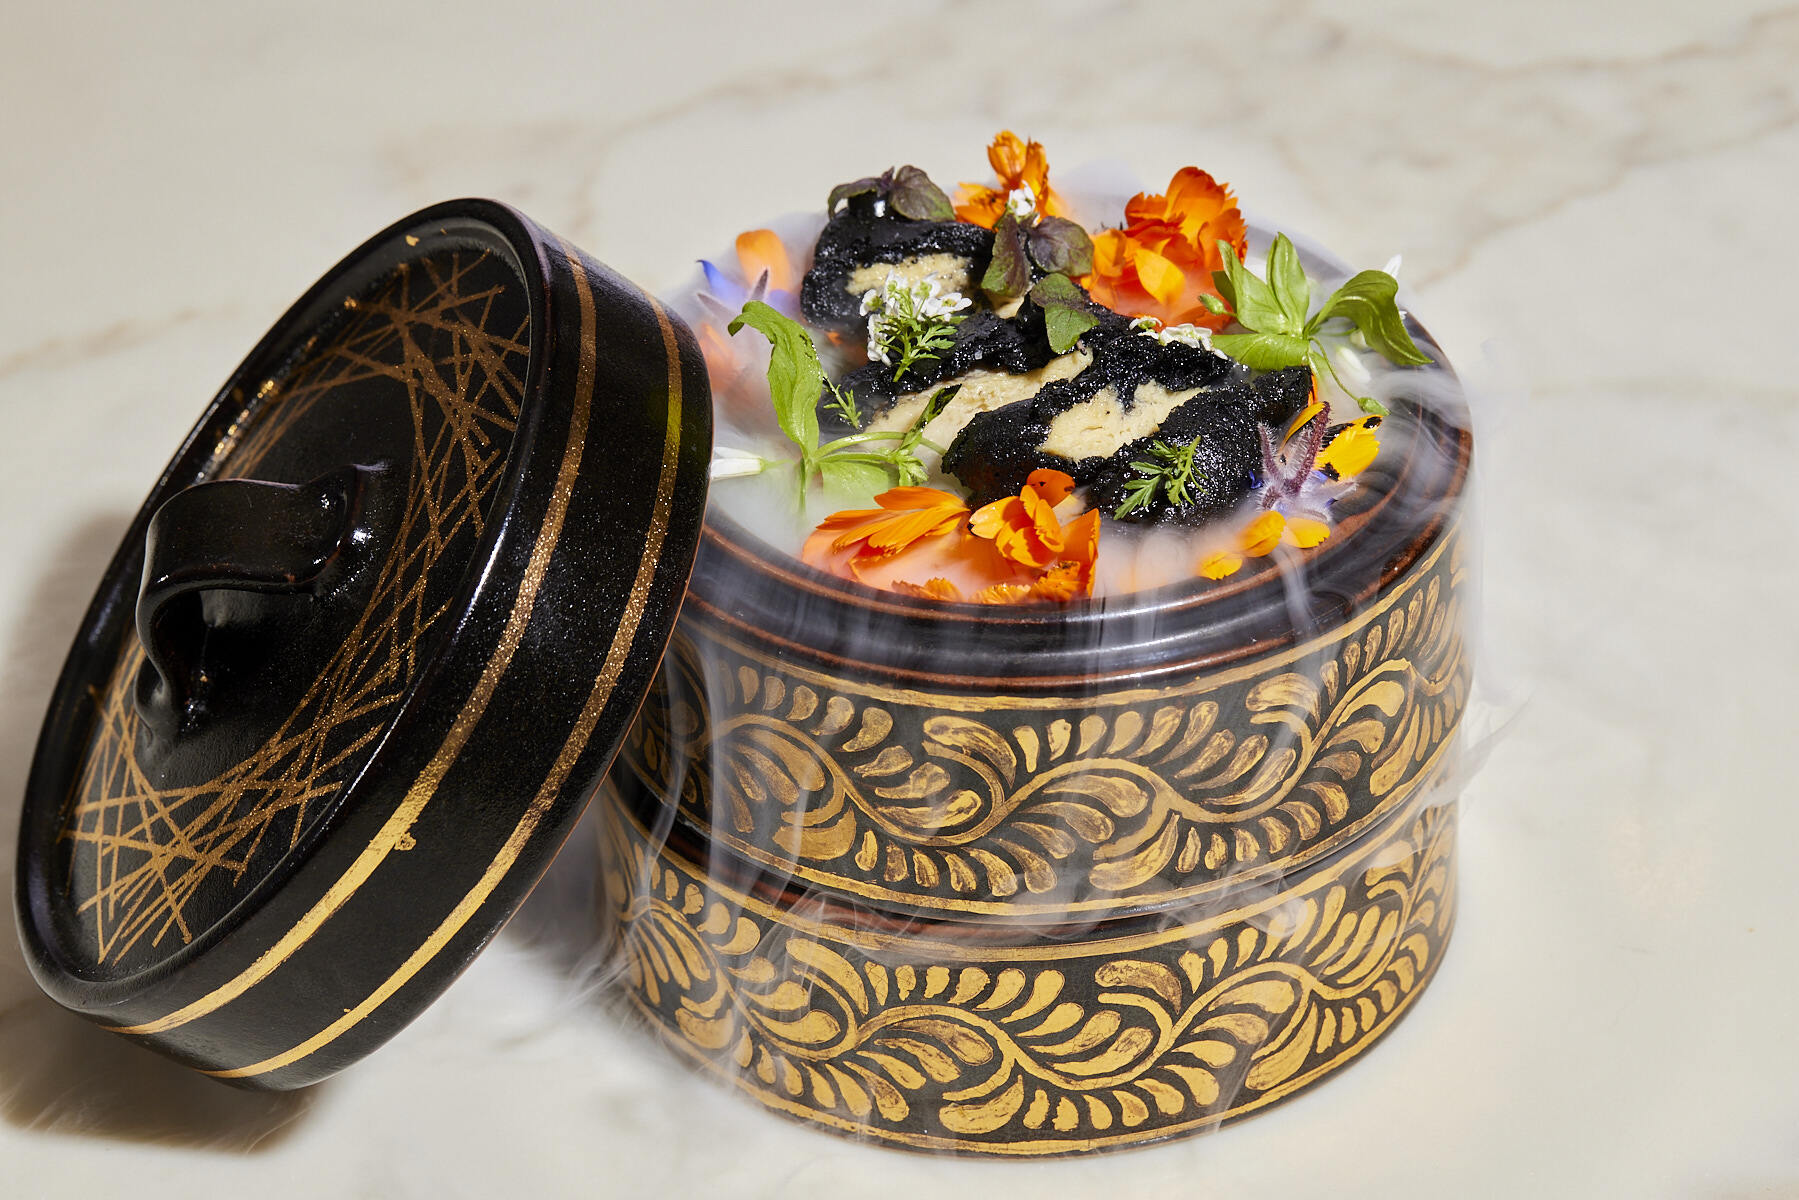 A round platter of food decorated with edible flowers and dry ice.